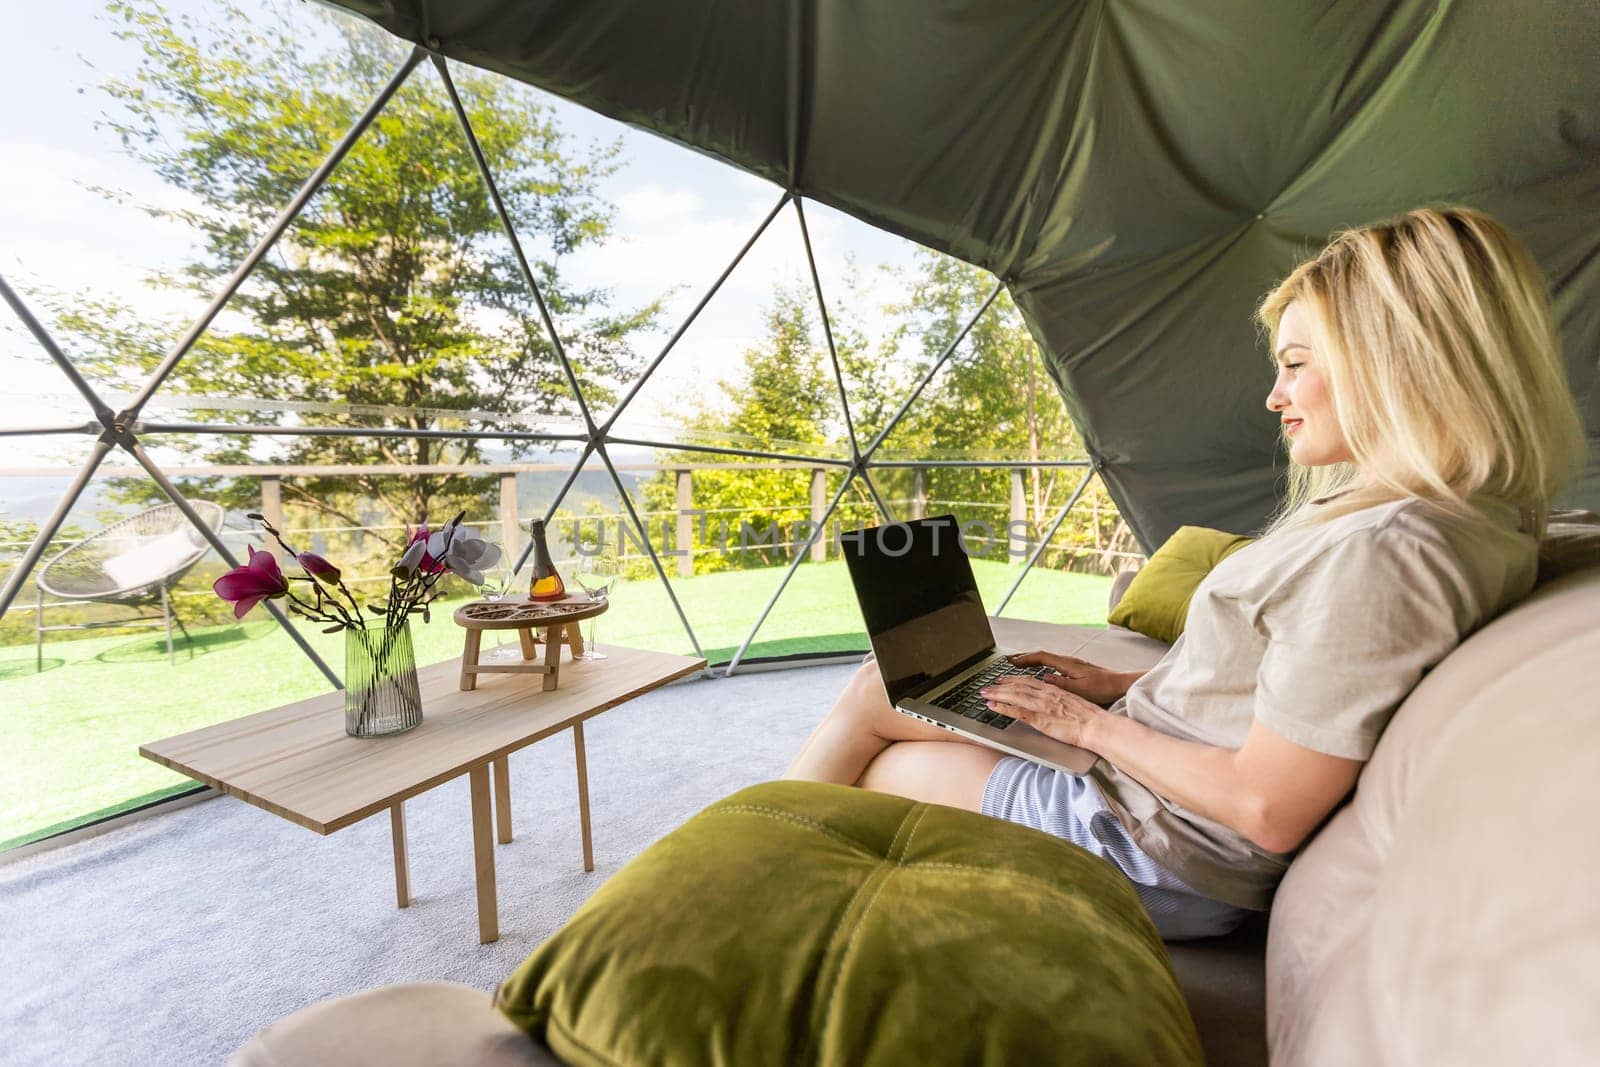 middle aged woman uses a laptop resting and spending time at Glamping house on holidays. holiday dome tent. Cozy, camping, hygge, lifestyle concept.